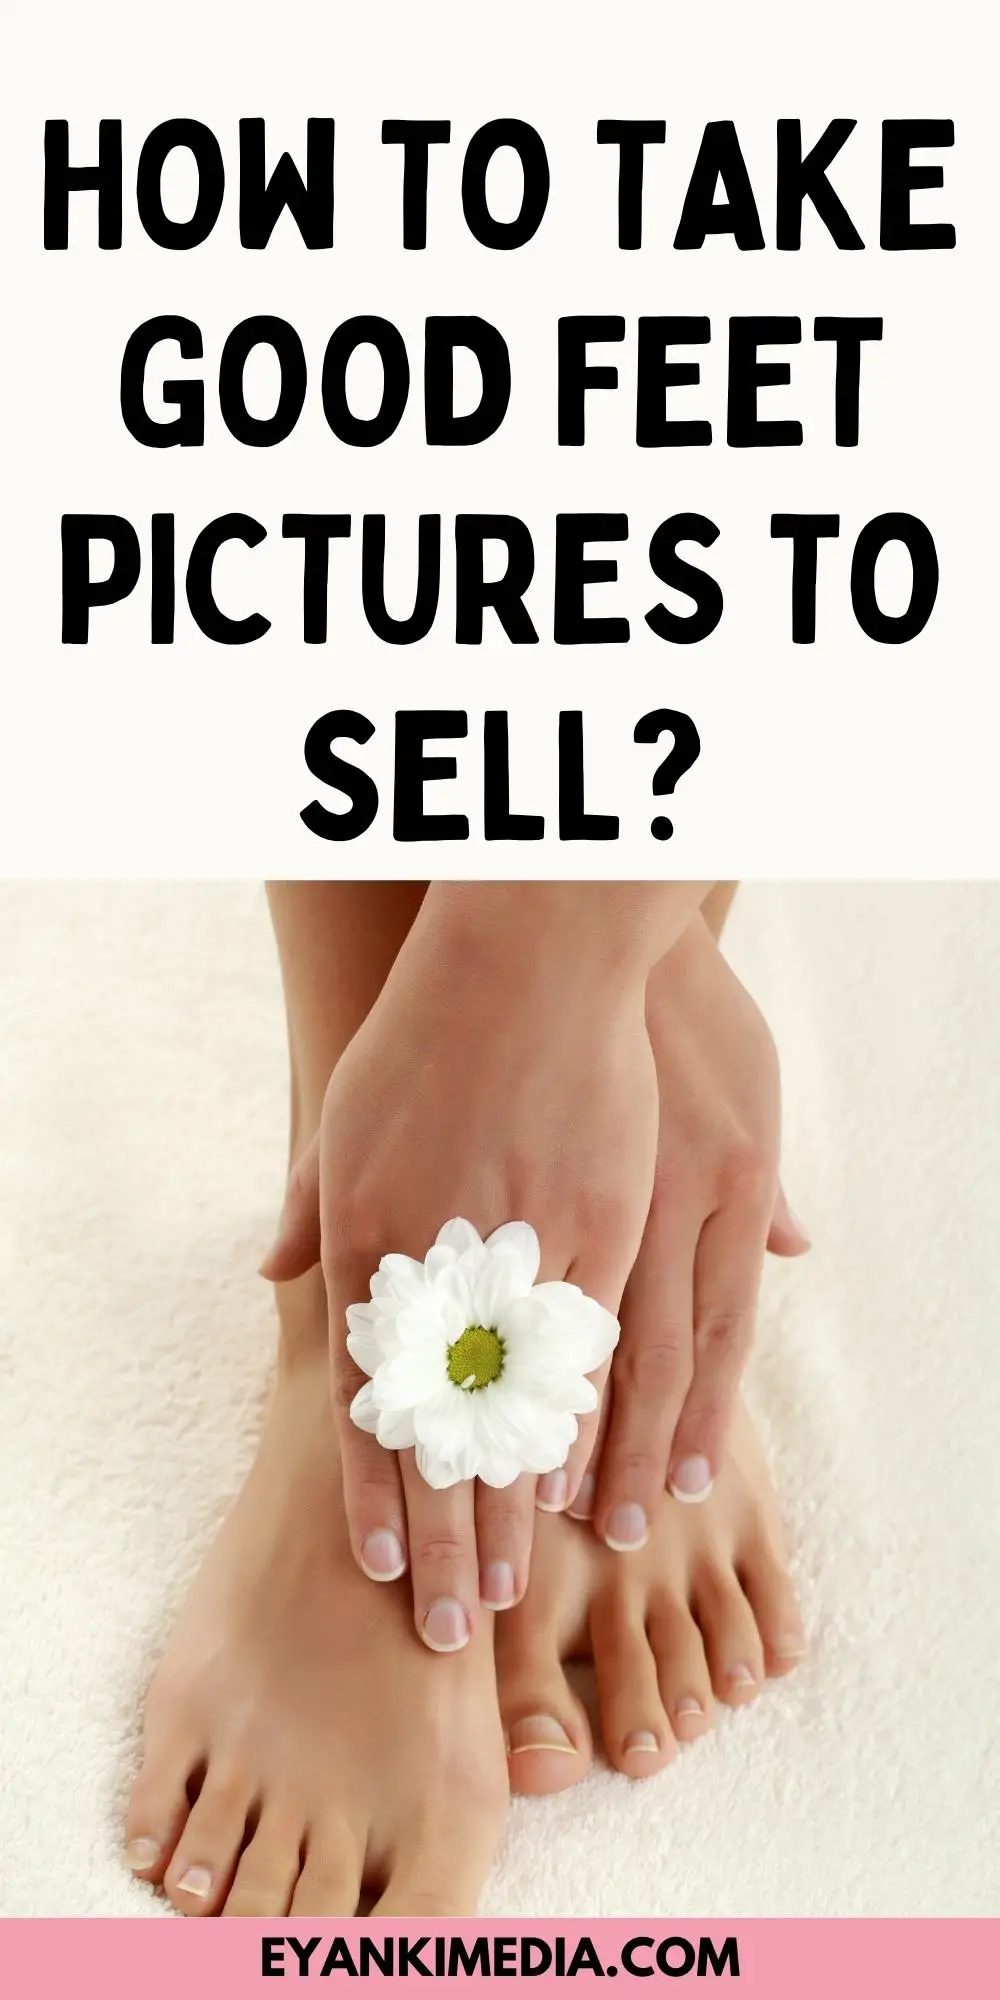 how to take good feet pictures to sell?